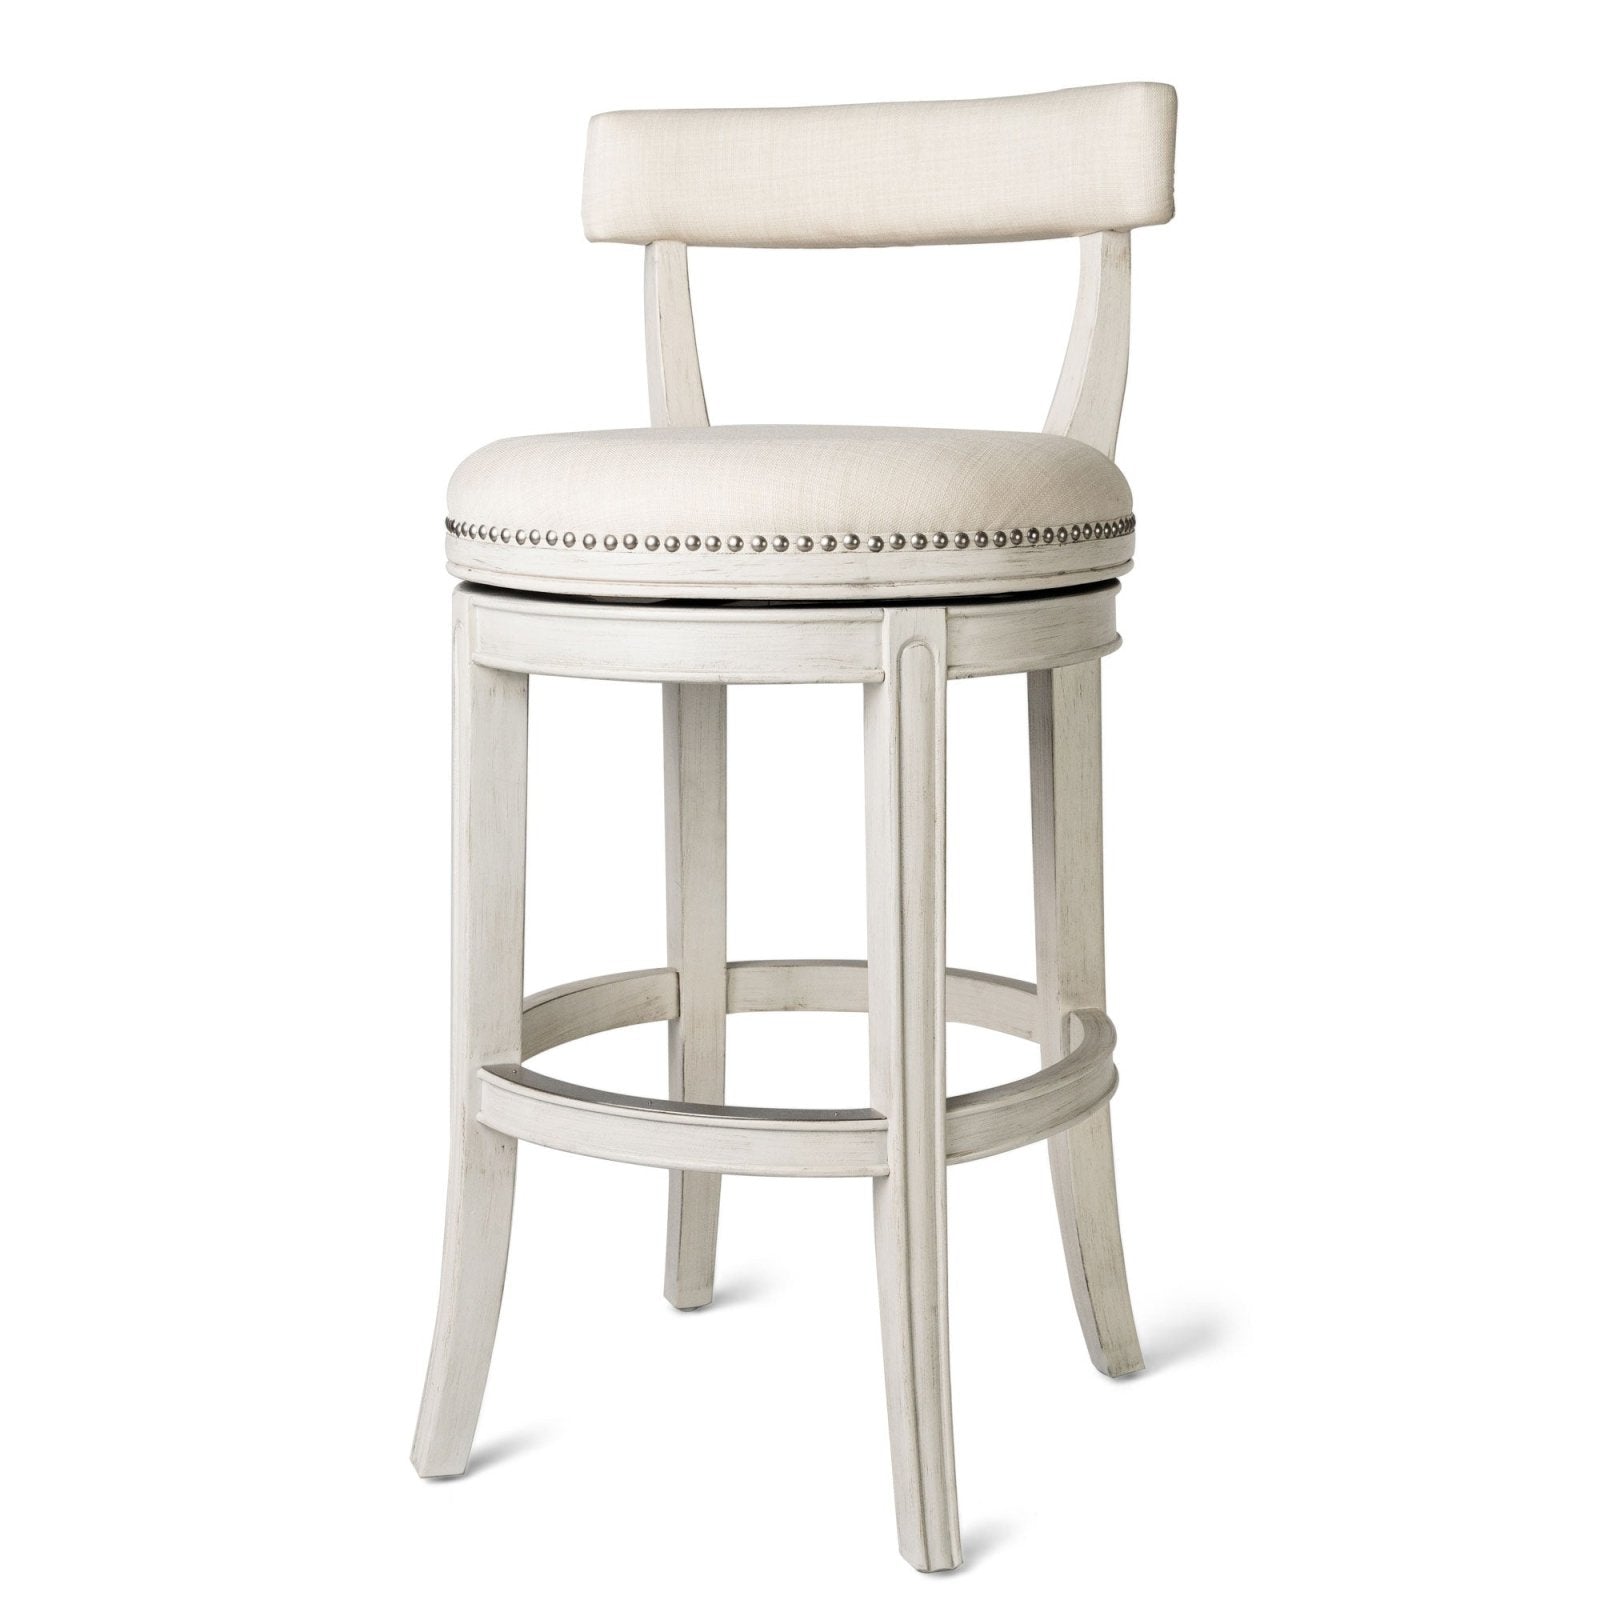 Alexander Bar Stool in White Oak Finish w/ Natural Color Fabric Upholstery